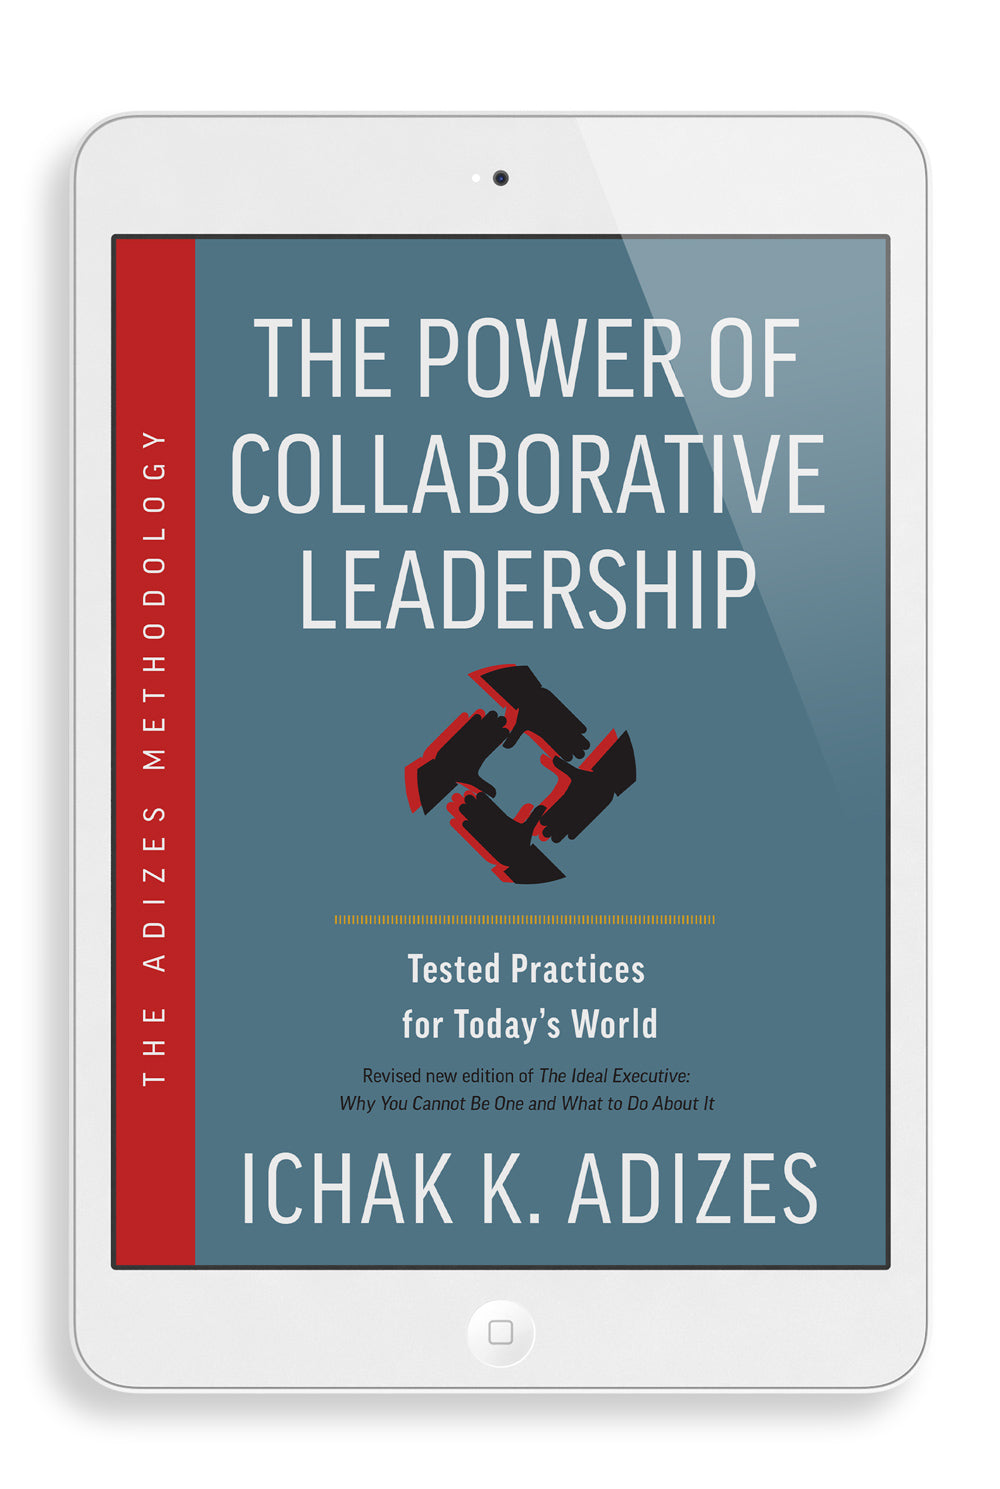 The Power of Collaborative Leadership - Free chapter